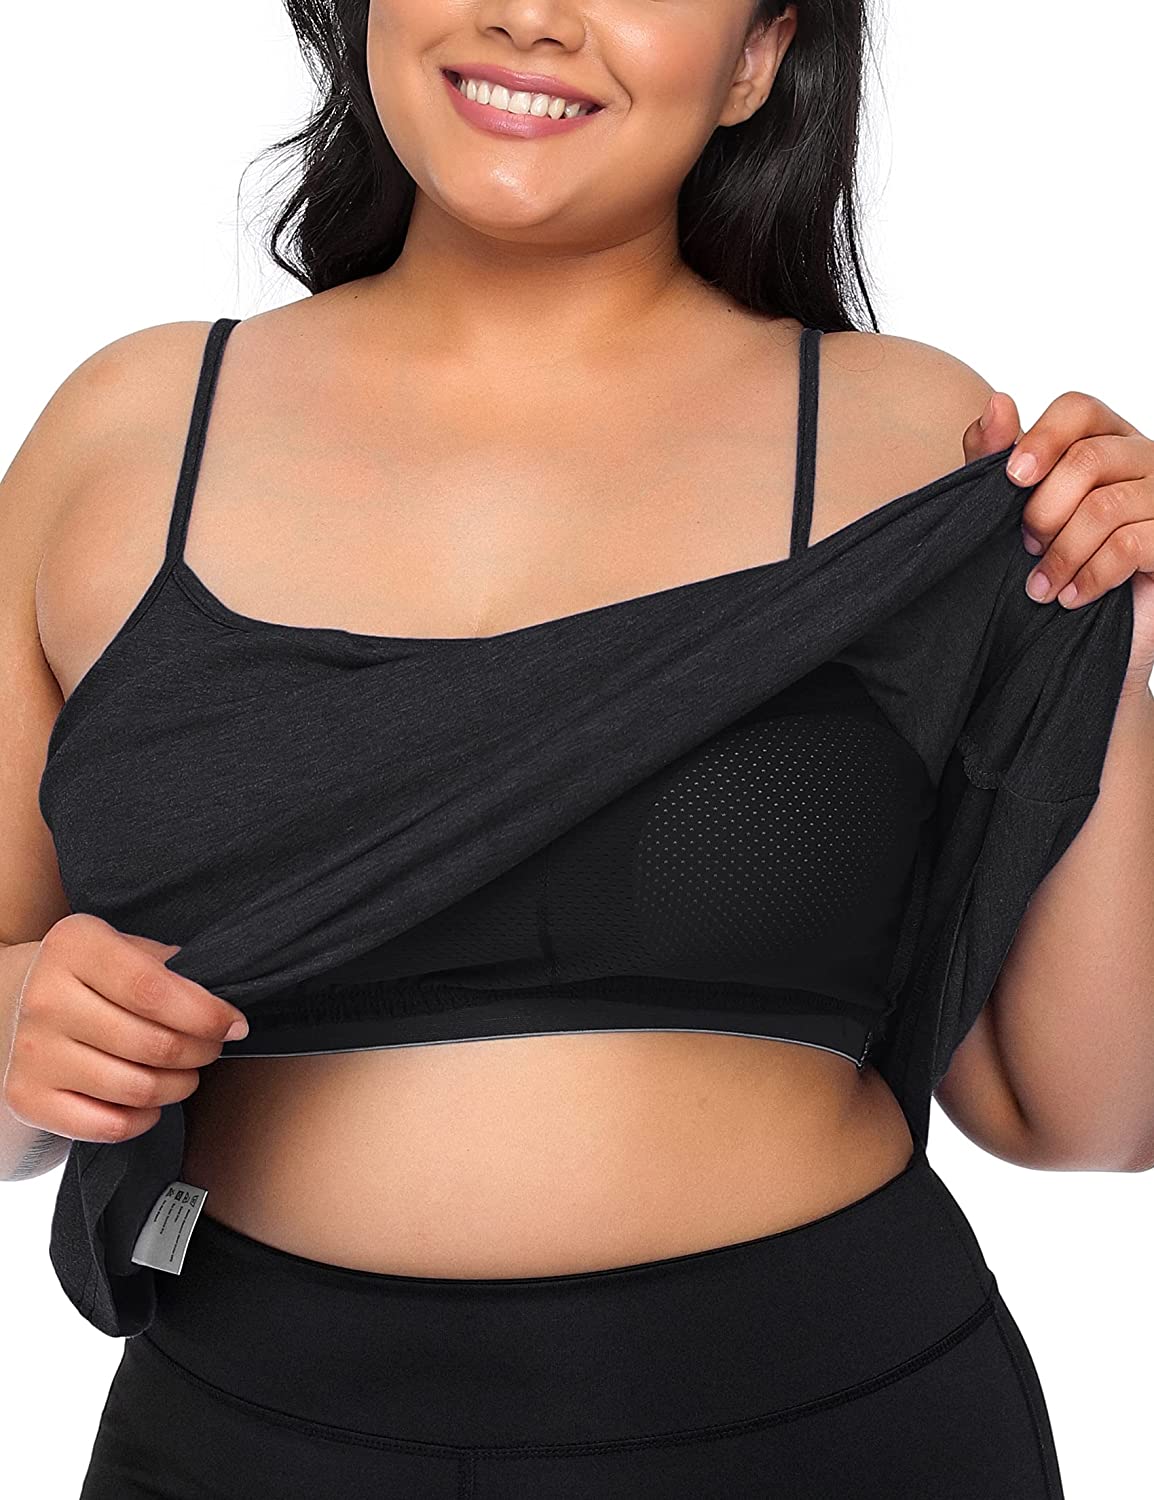 Lafaris Plus Size Workout Tank Tops with Built in Bra Camisole